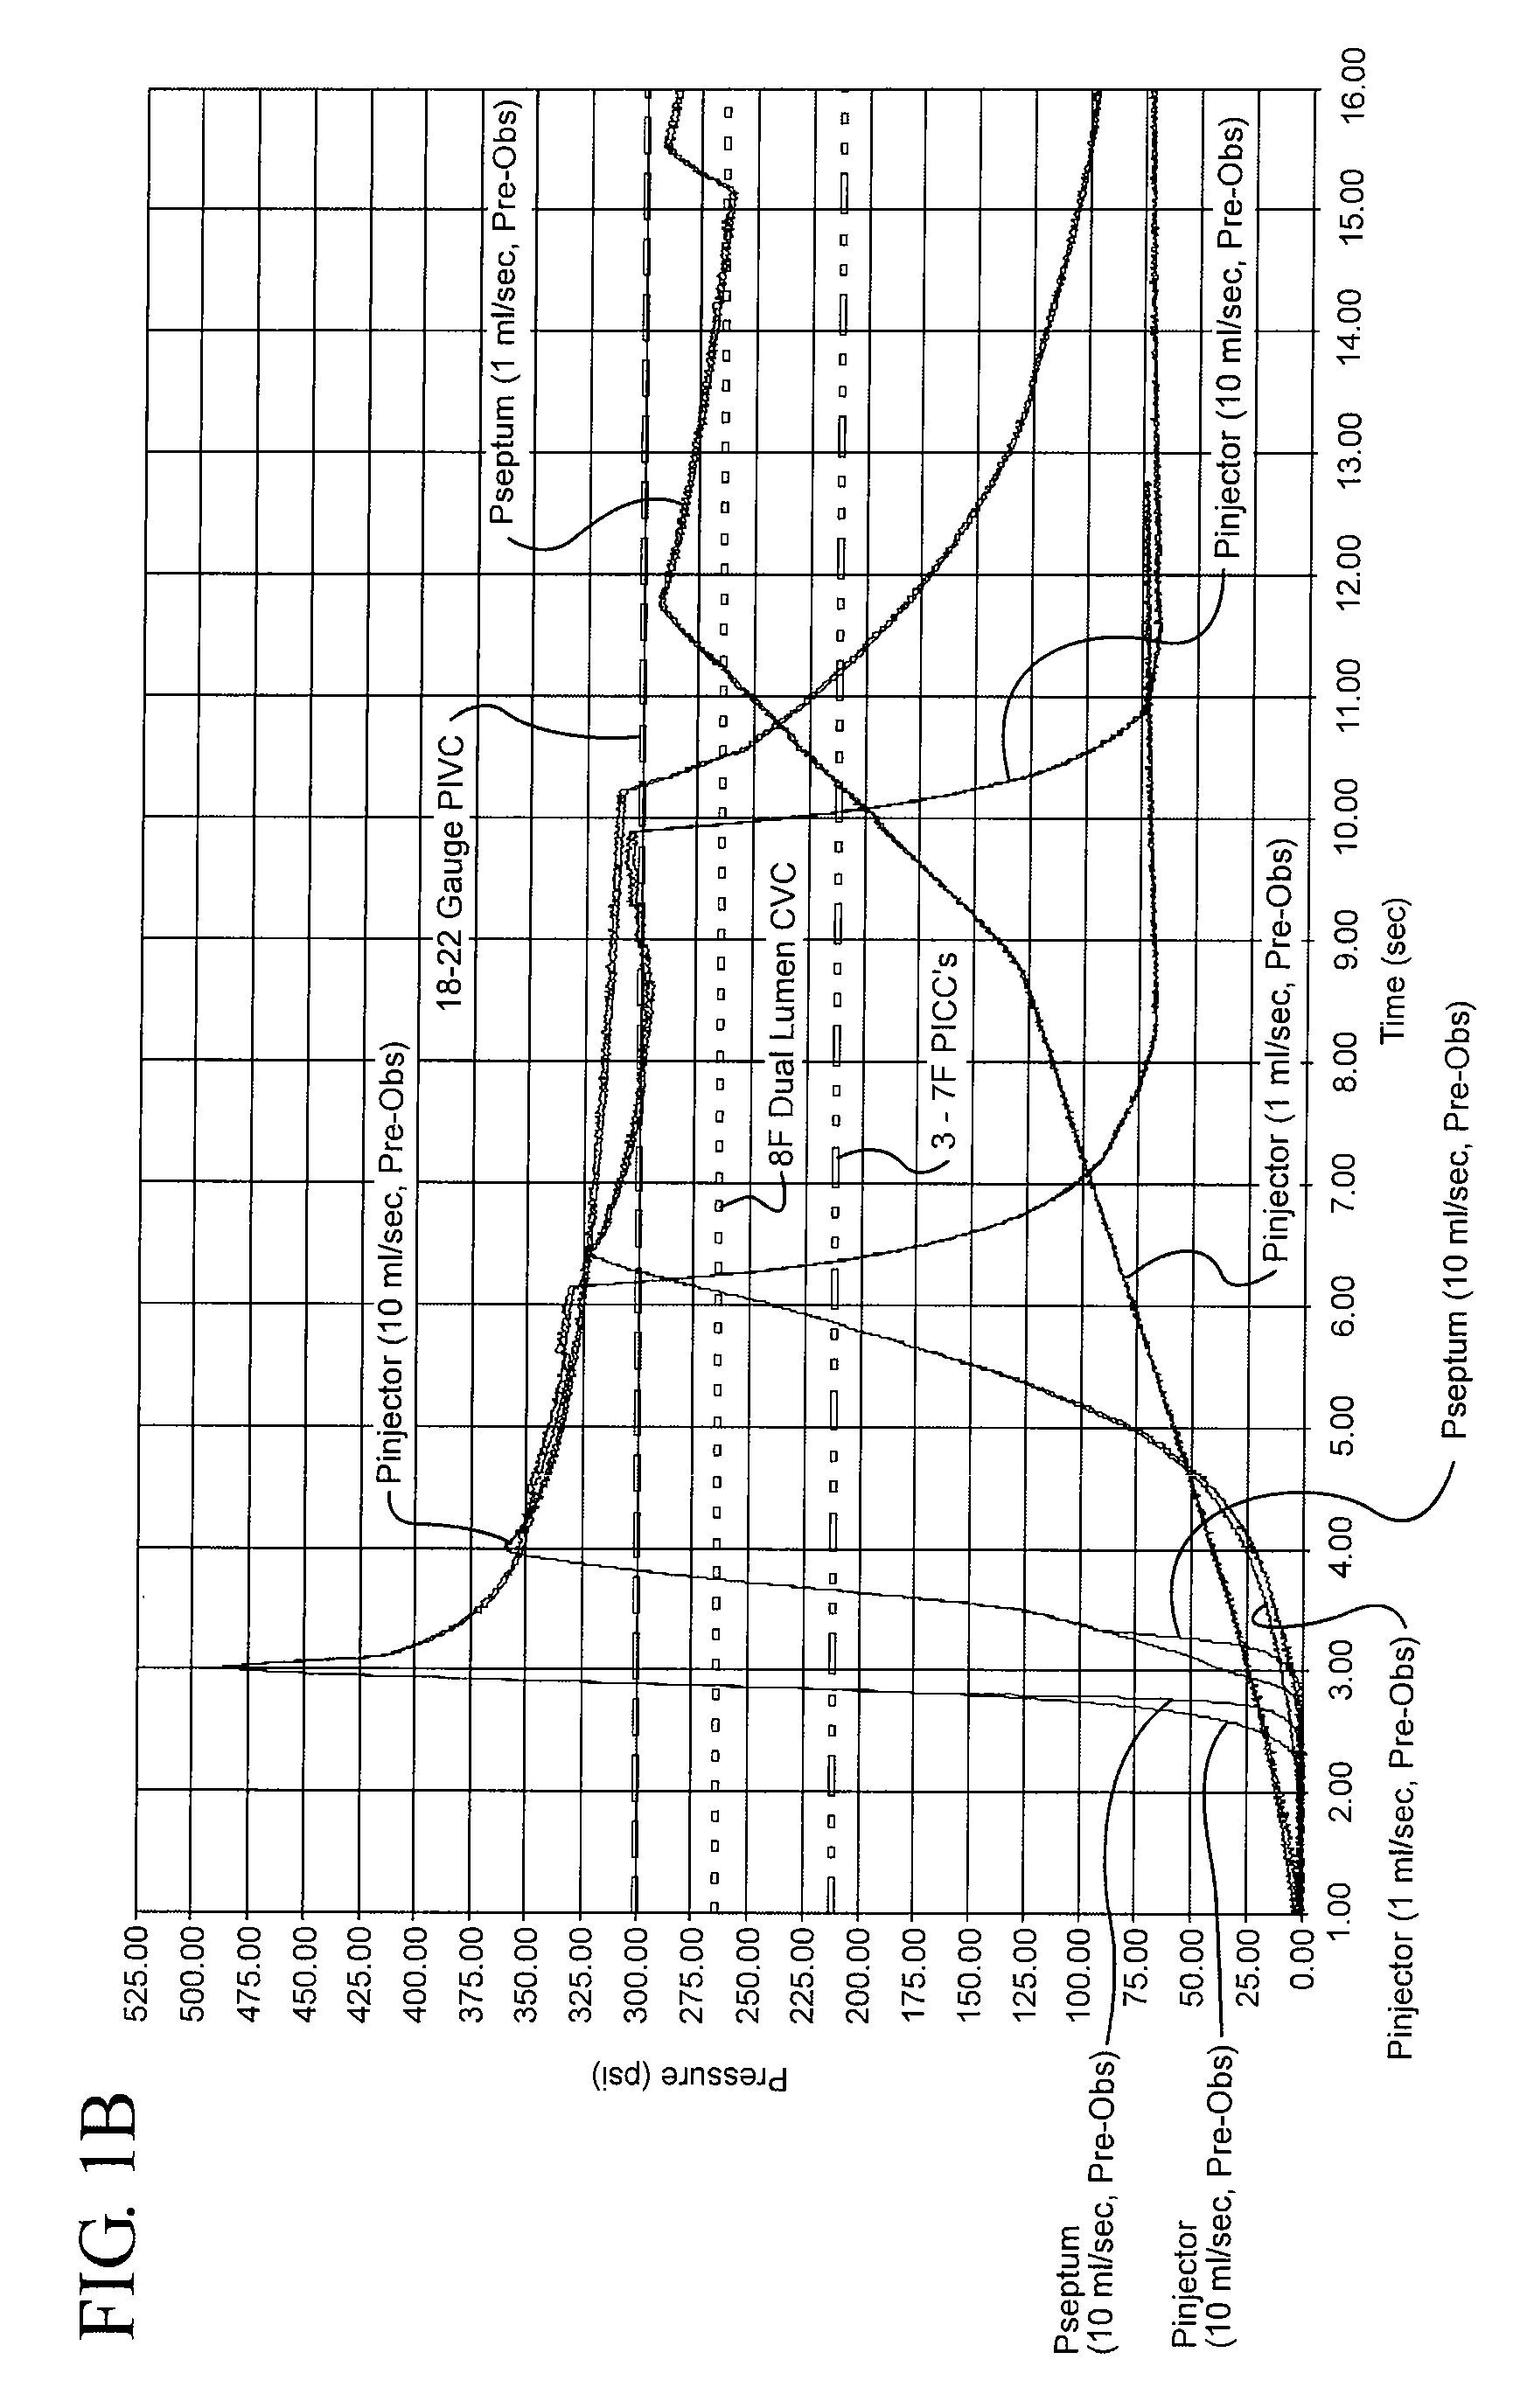 Systems and methods for providing an automatic occulsion device